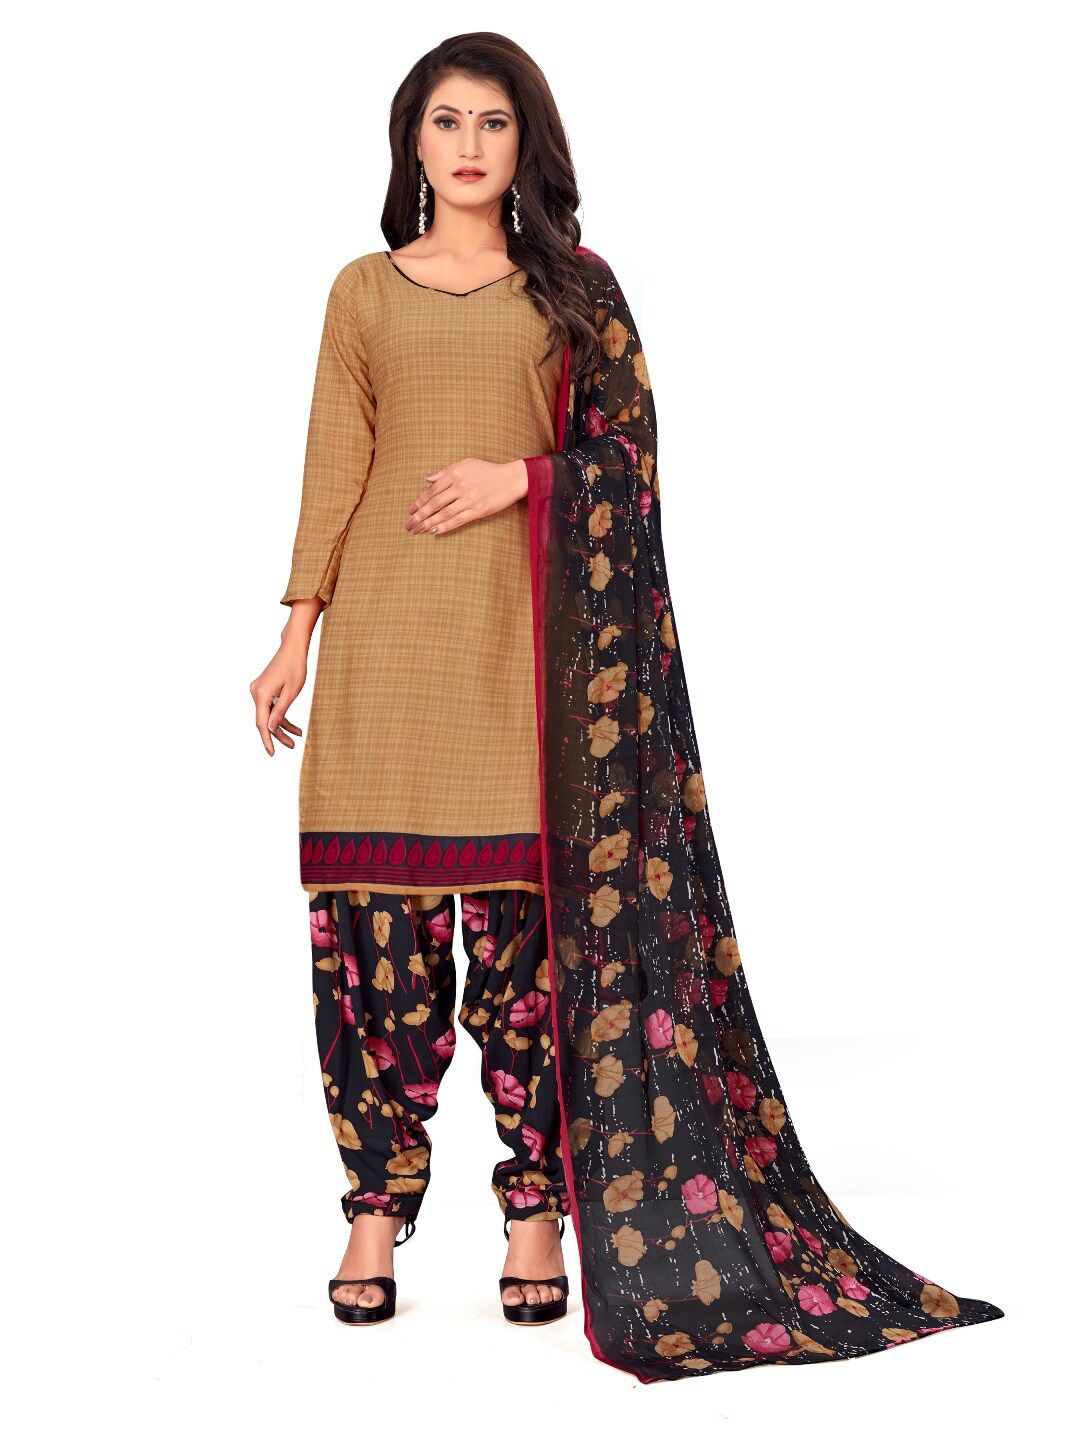 INDIAN HERITAGE Khaki & Black Printed Silk Crepe Unstitched Dress Material Price in India